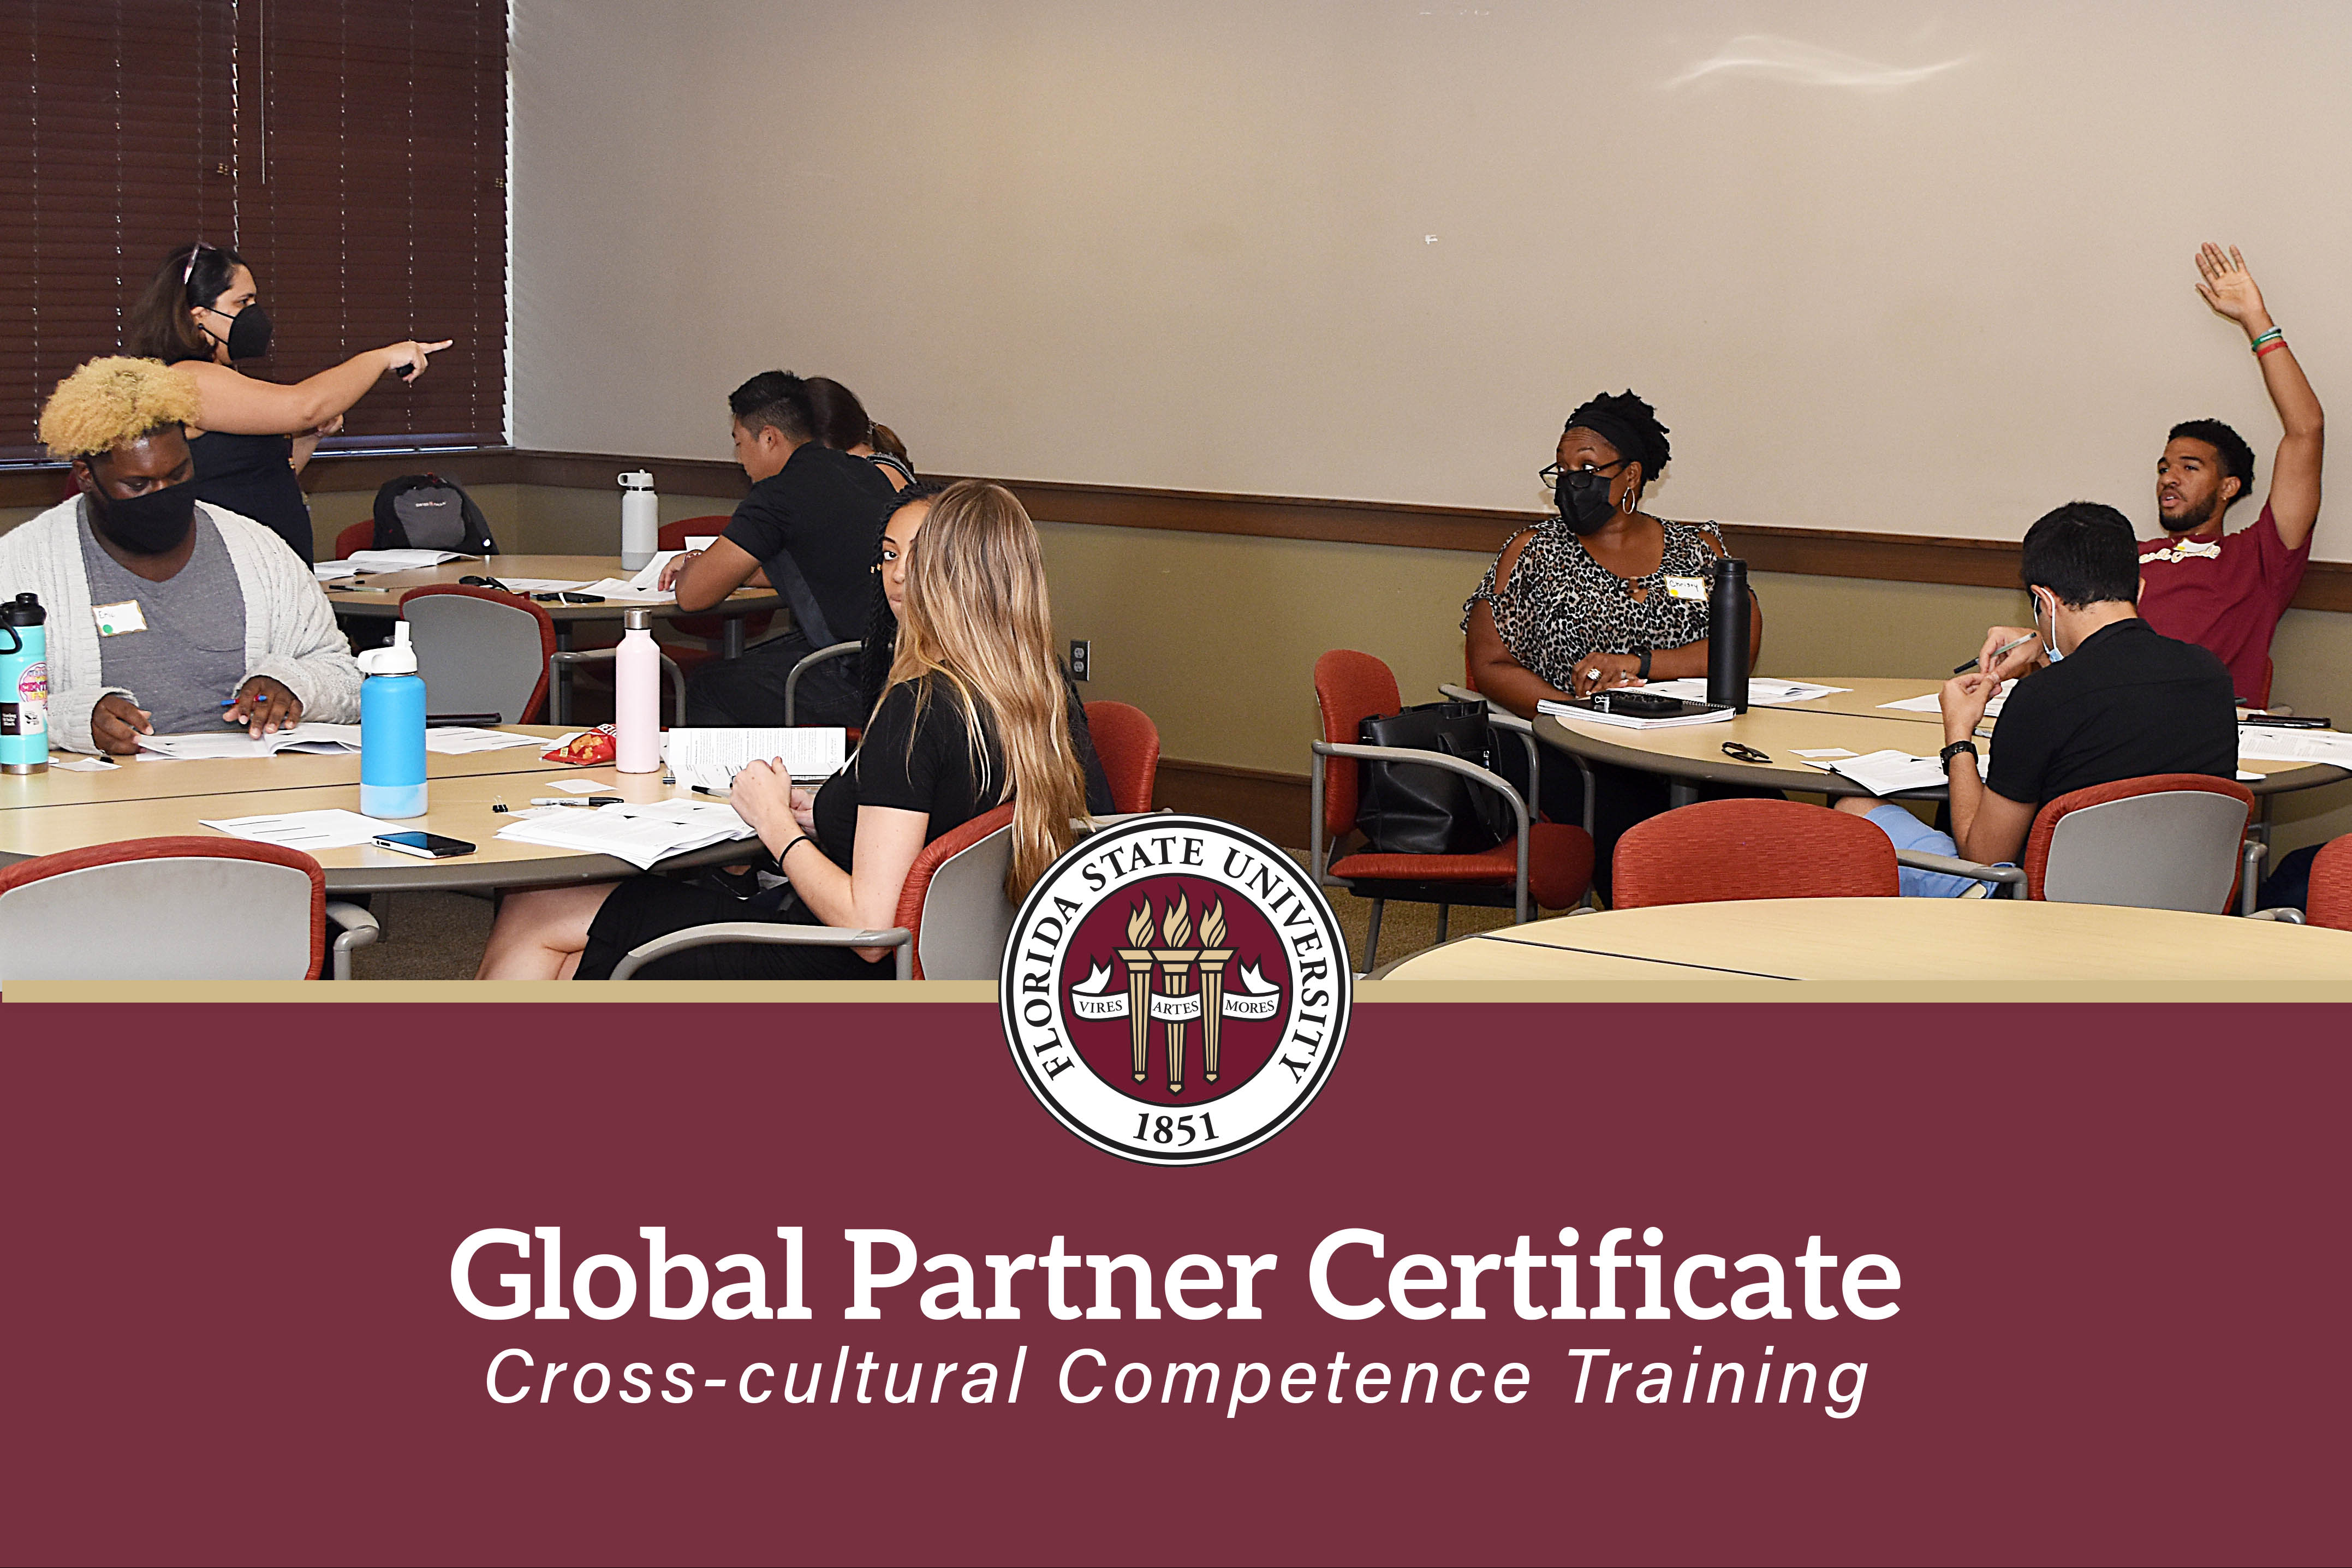 Florida State University's Global Partner Certificate: Cross-cultural Competence Training. Dr. Tanu Kohli Bagwe calls on a participant with their hand raised in class.